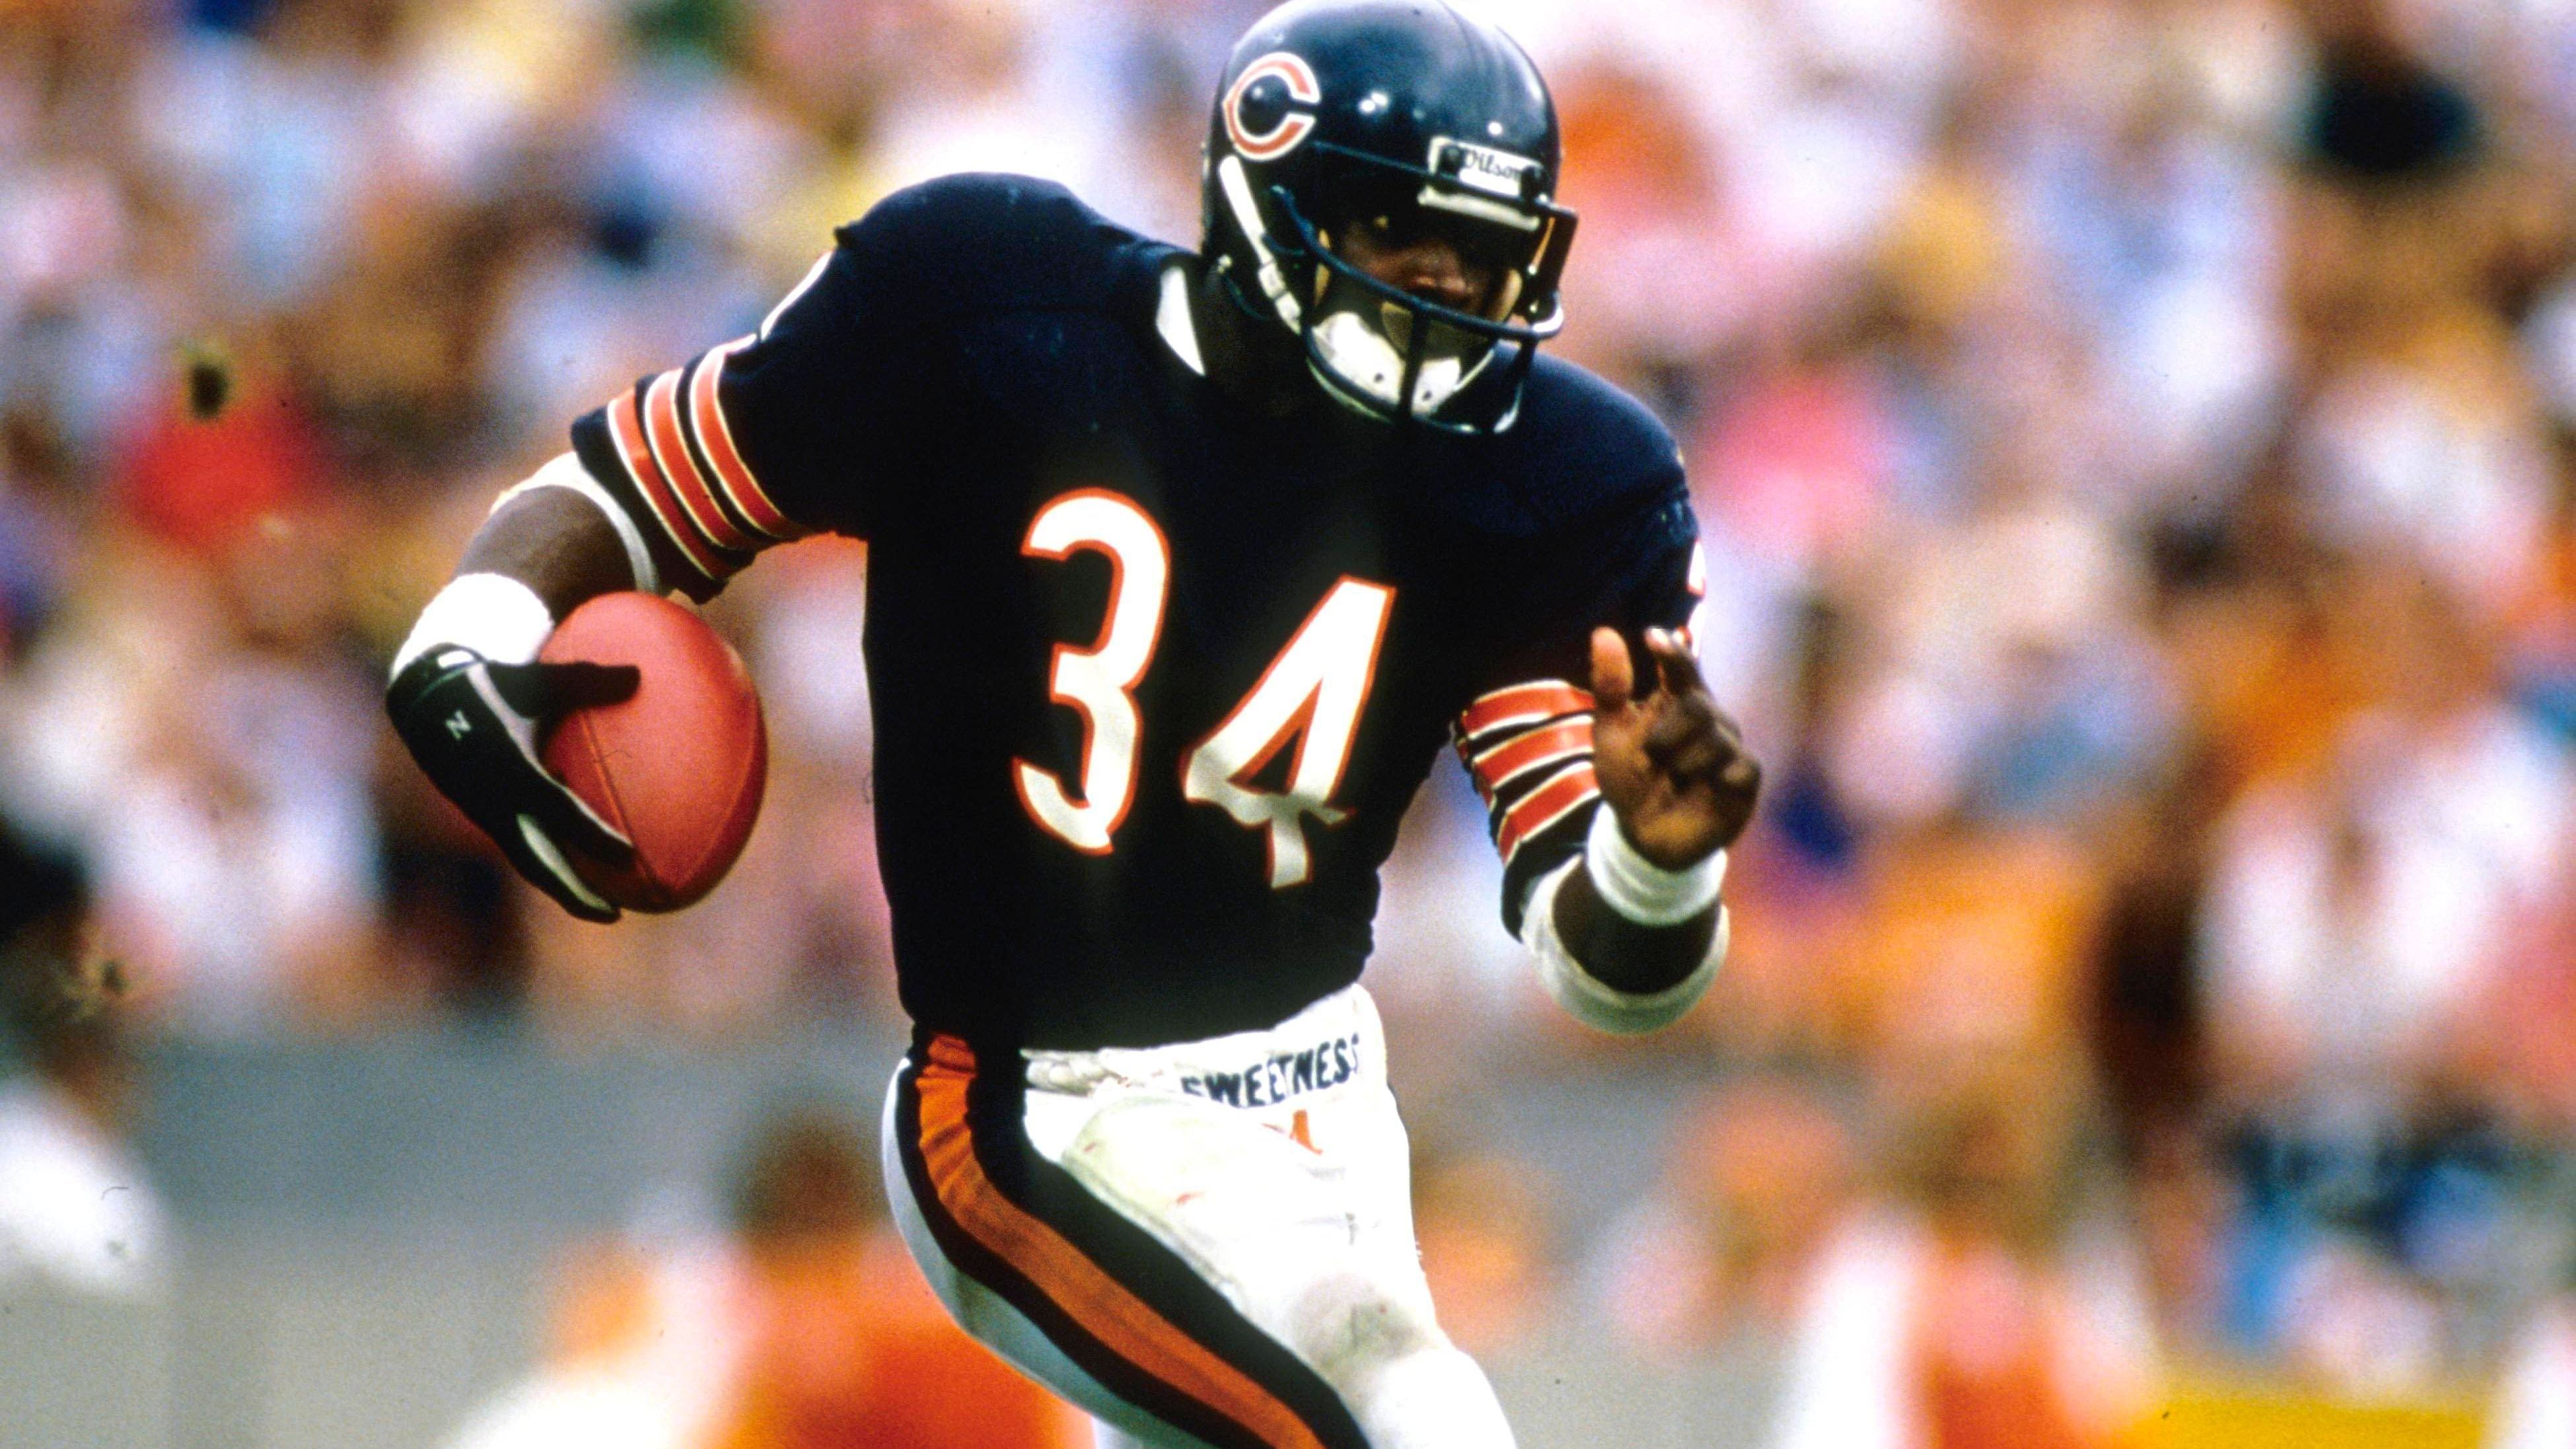 <strong>Chicago Bears - Walter Payton</strong><br>Rushing-Yards: 16.726<br>Rushing-Touchdowns: 110<br>Jahre im Team: 13&nbsp;<br>Absolvierte Spiele: 190